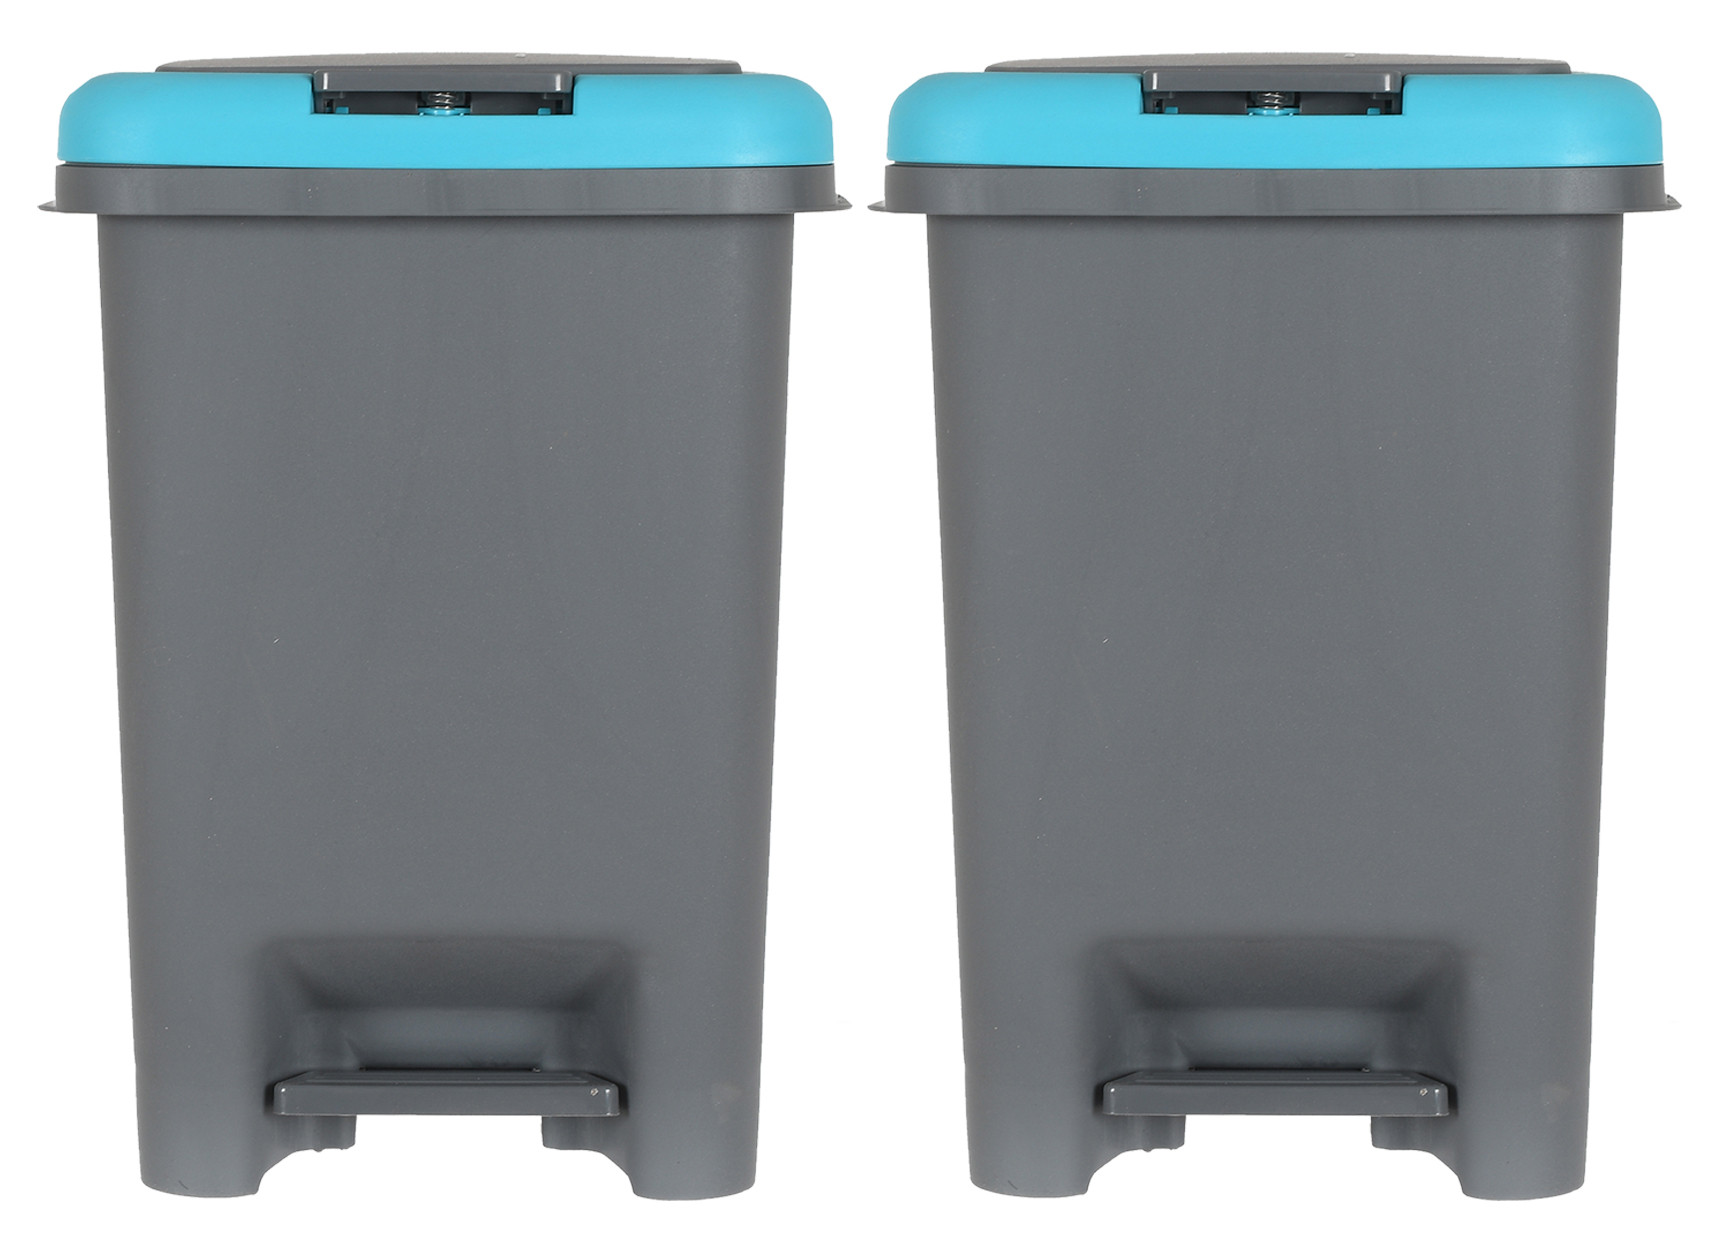 Kuber IndustriesPortable 6.5 Ltr Plastic Push And Pedal Dustbin With Lid Garbage Bins for Home Office (Grey & Blue)